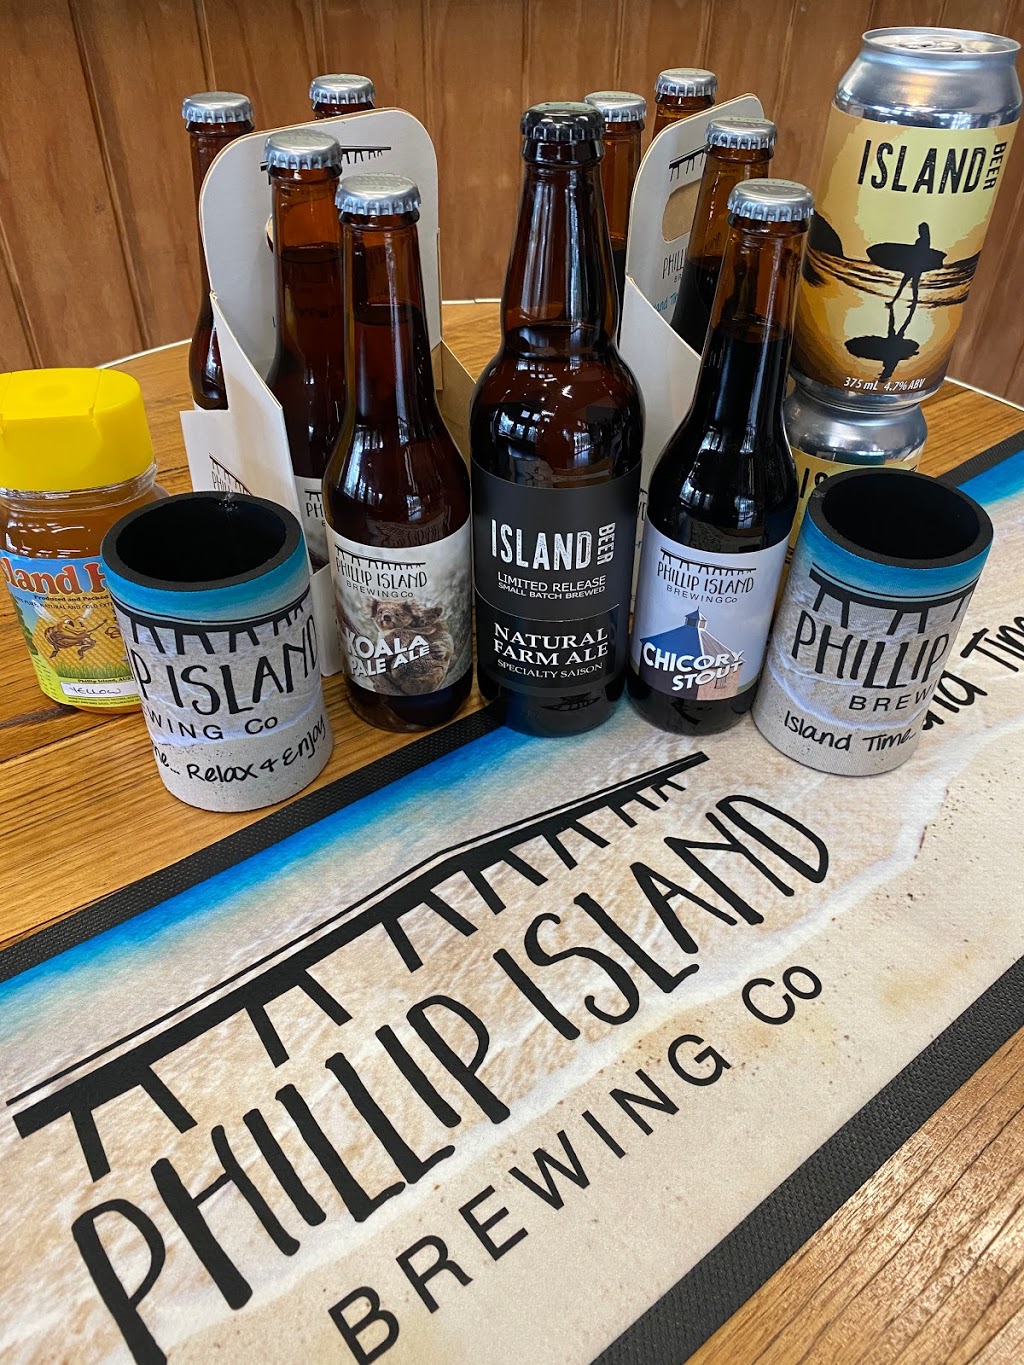 Phillip Island Brewing Co | food | 1821 Phillip Island Rd, Cowes VIC 3922, Australia | 0359521666 OR +61 3 5952 1666